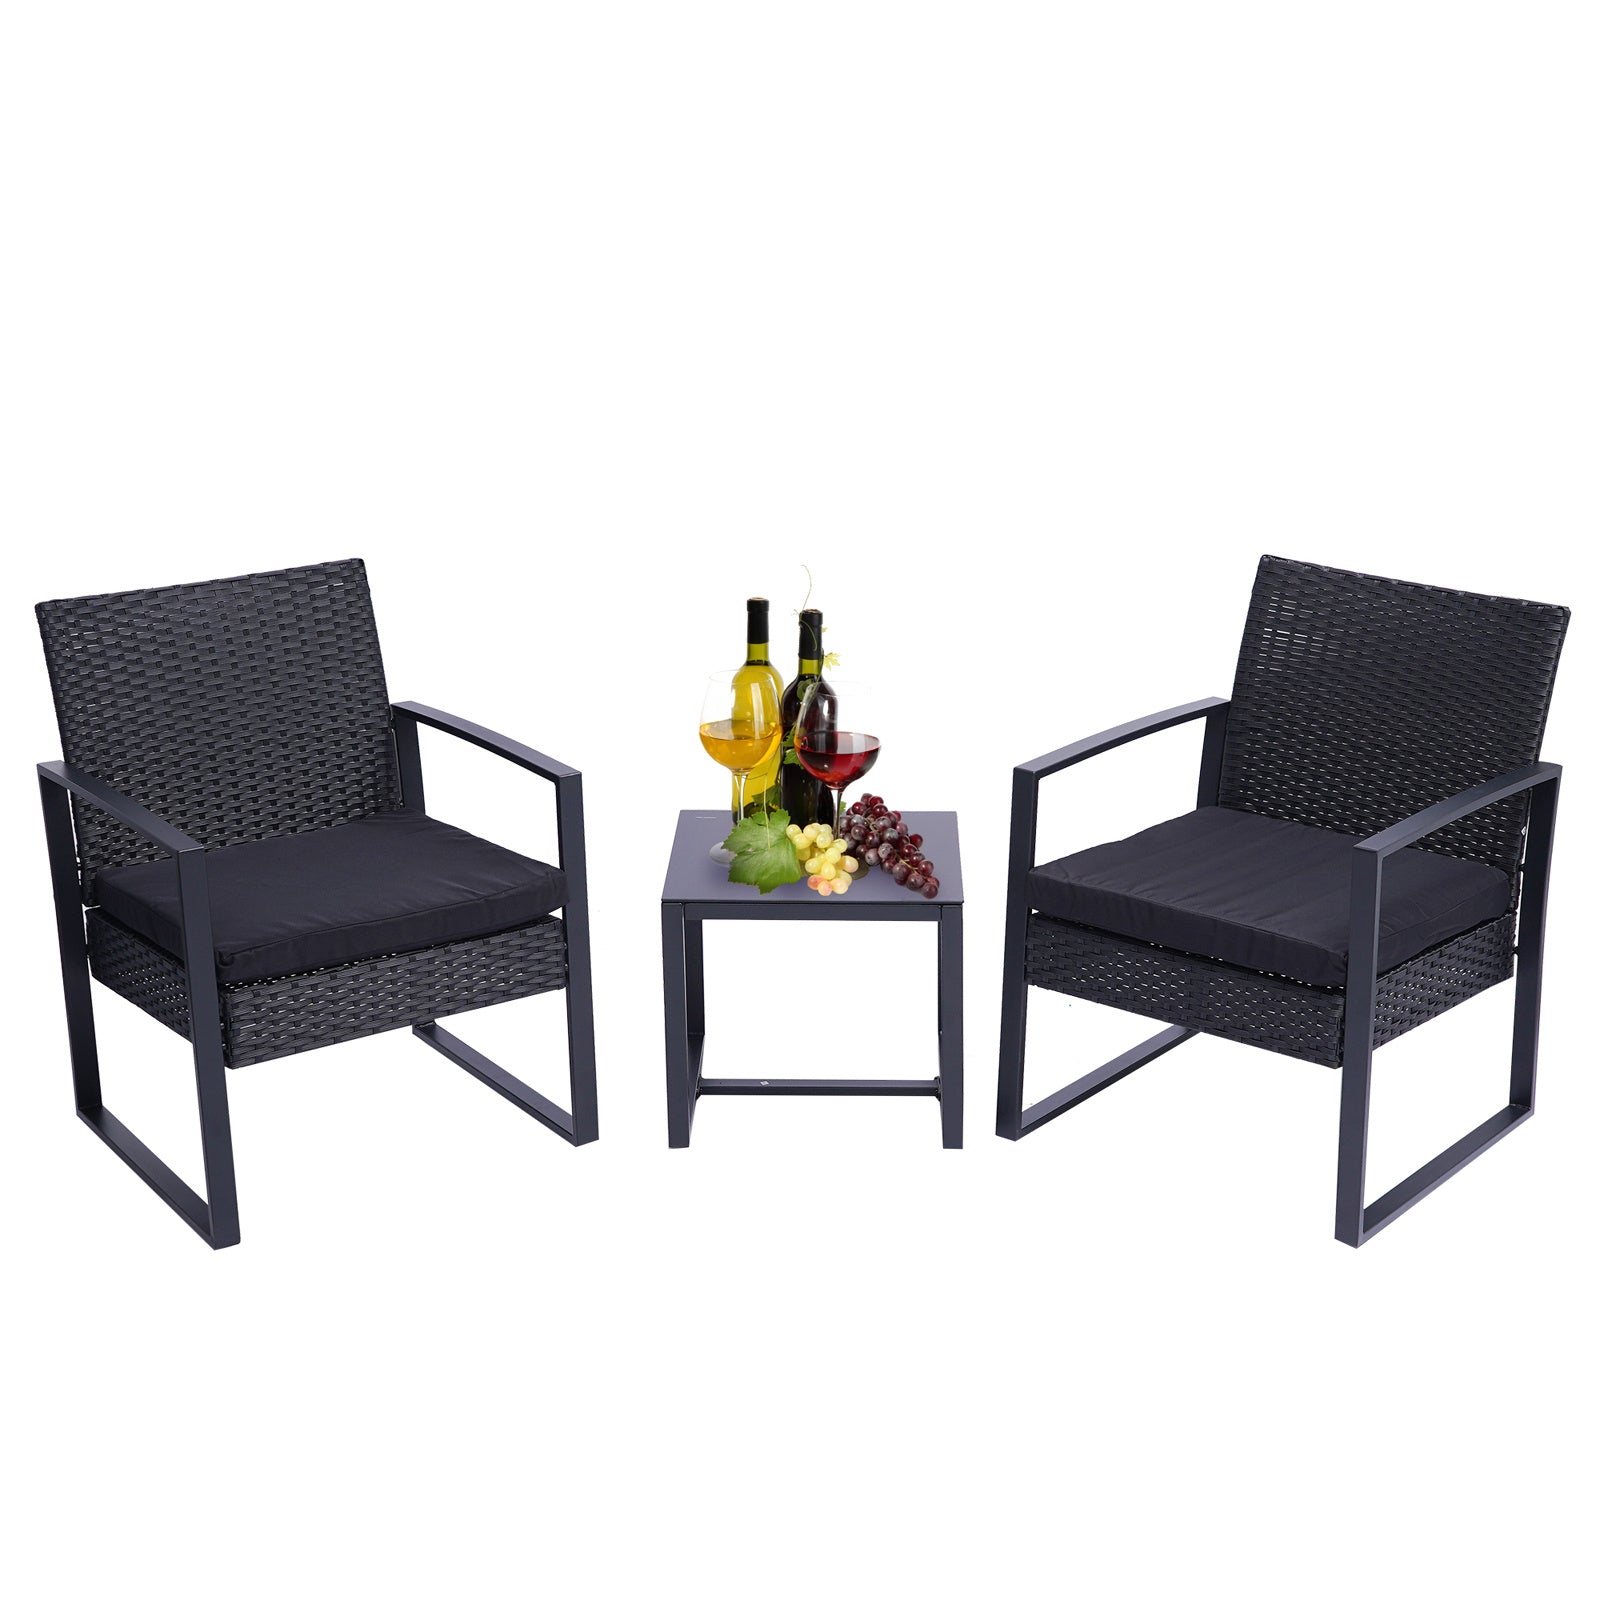 3 Pieces Patio Set Outdoor Wicker Patio Furniture Sets Modern Set Rattan Chair Conversation Sets with Coffee Table for Yard and Bistro (Black)